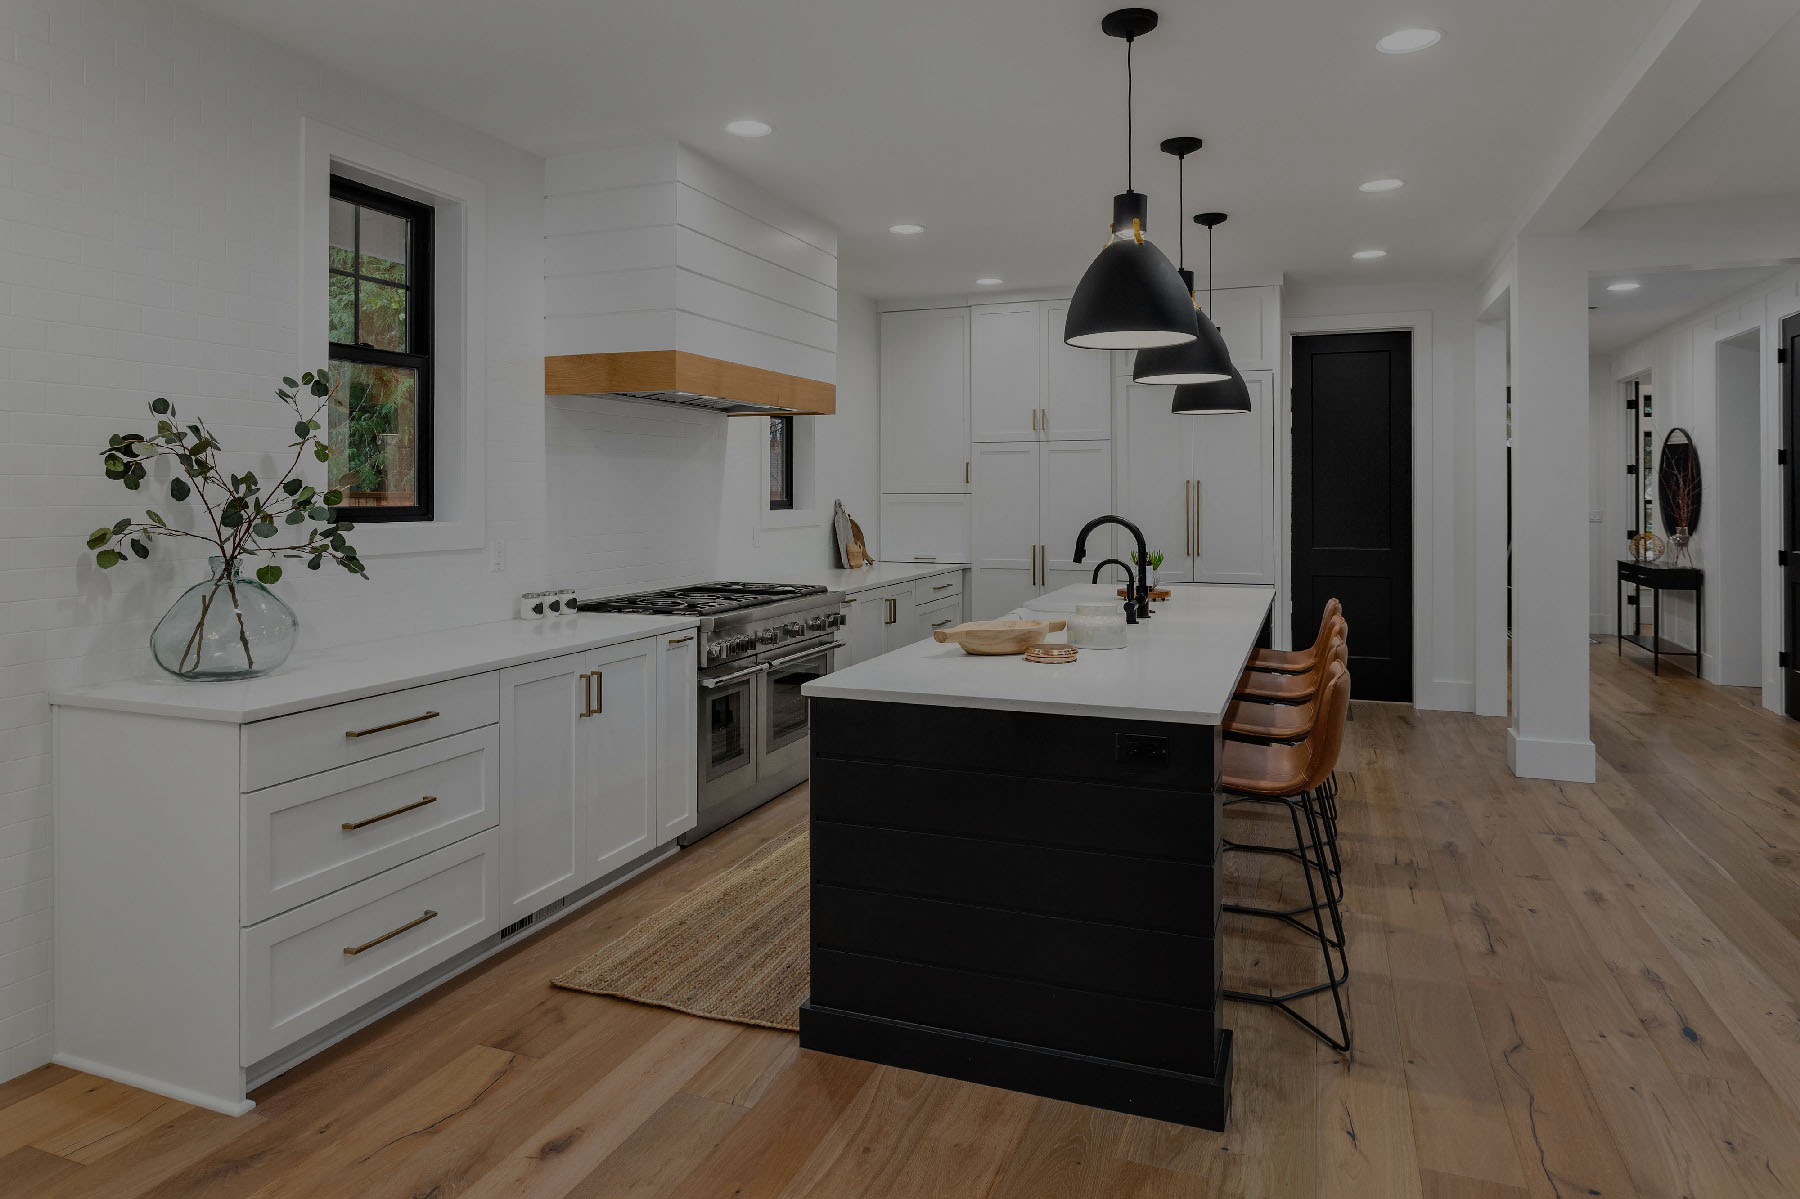 Beautiful white kitchen with dark accents in new modern farmhouse style luxury home1